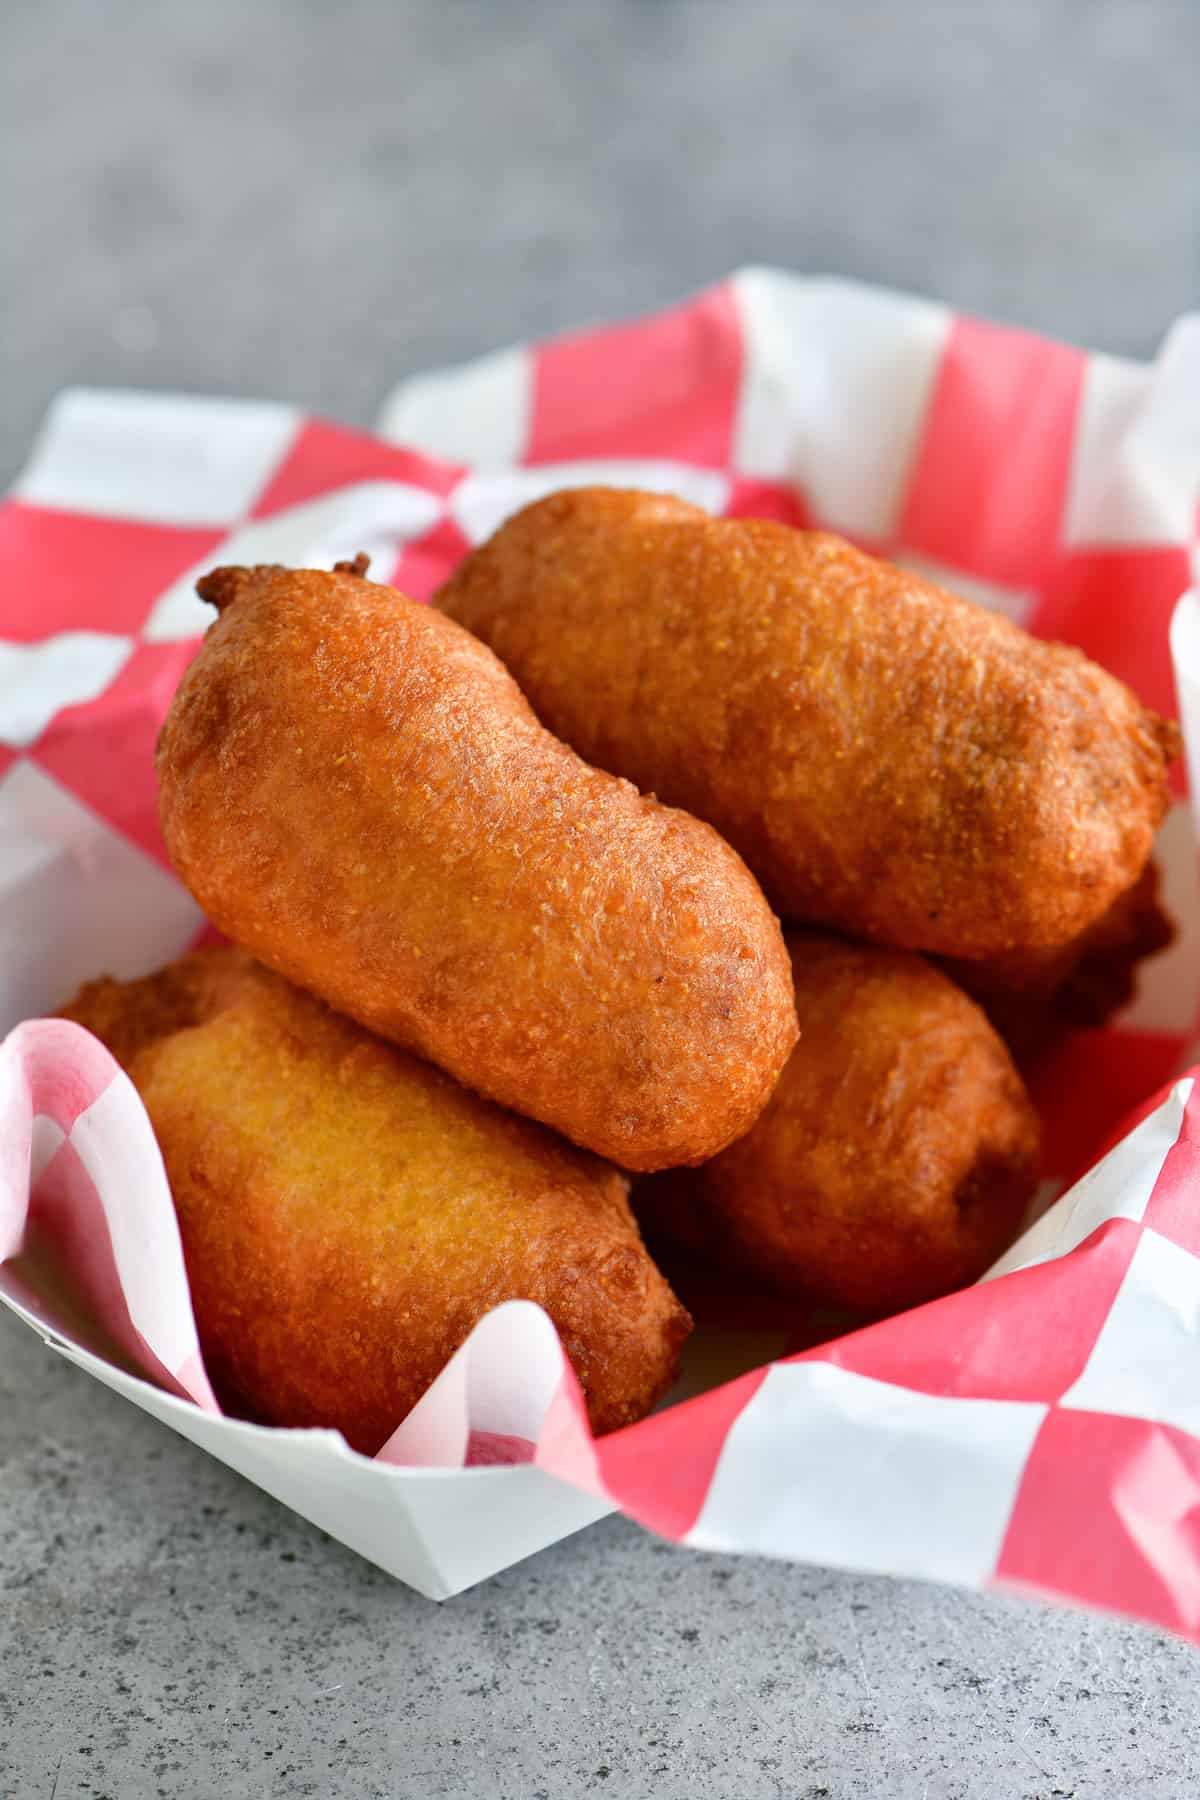 golden crispy mini corn dogs stacked in a red and white paper serving tray